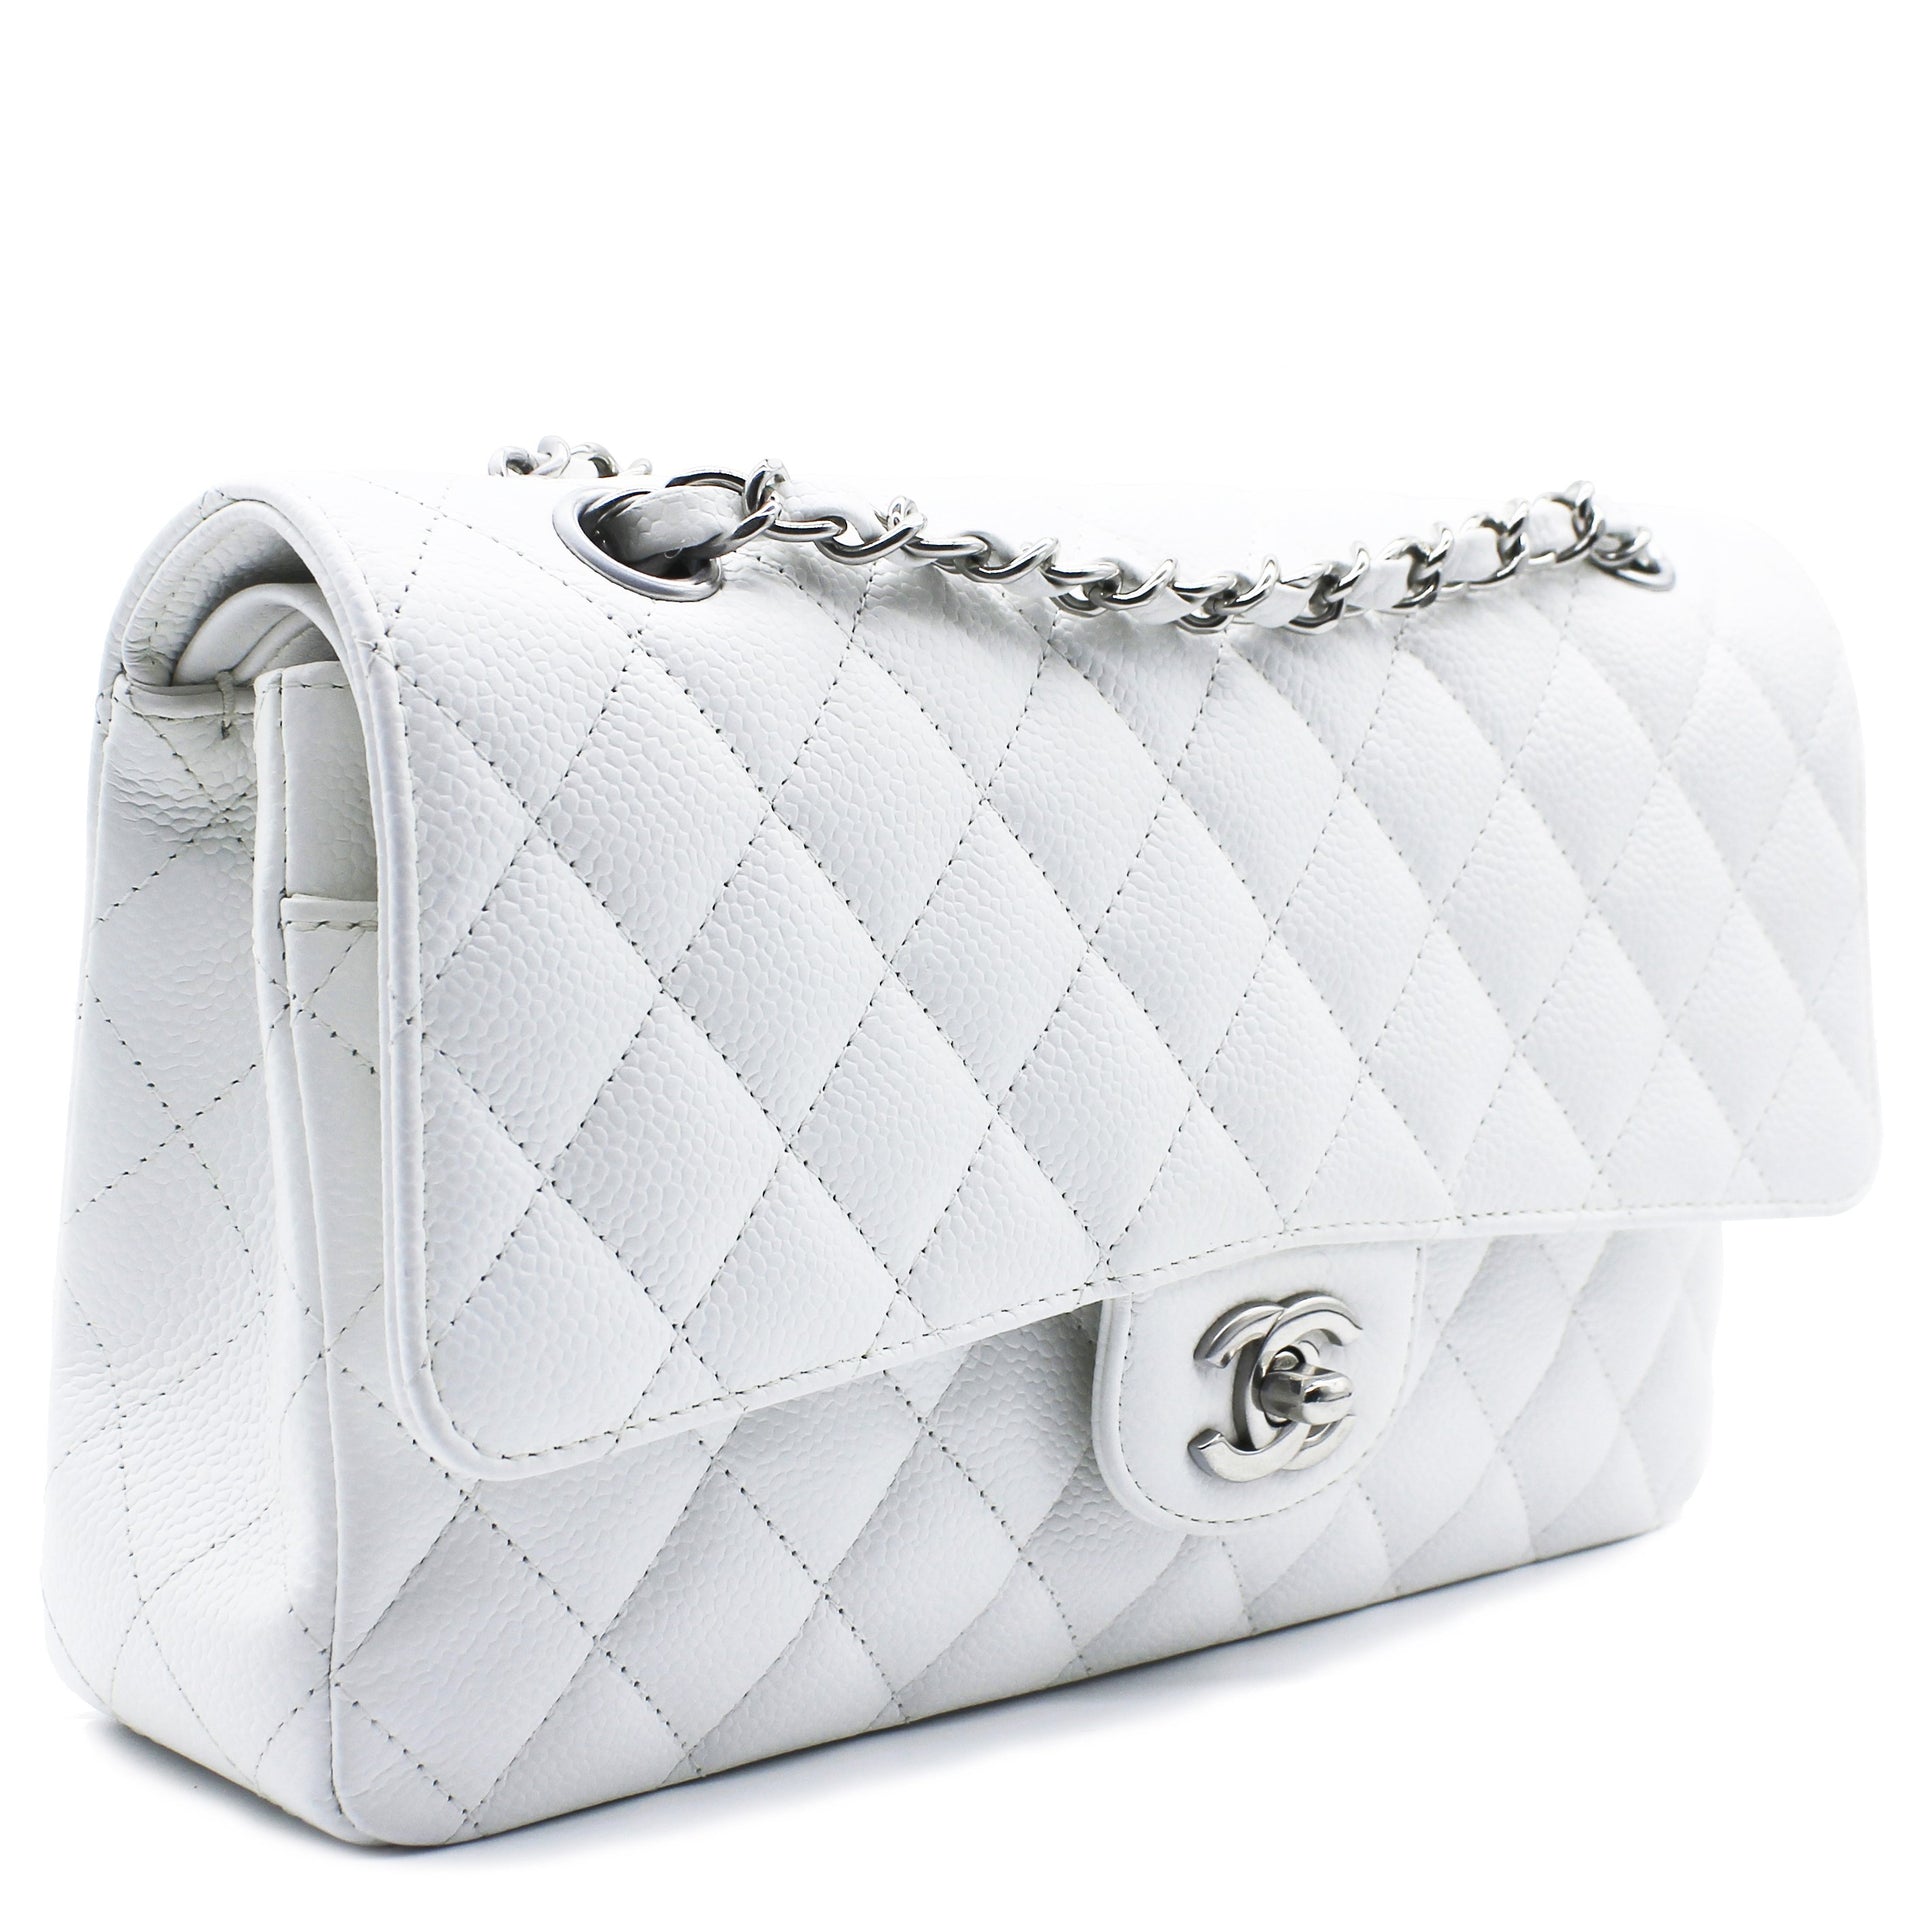 white chanel classic double